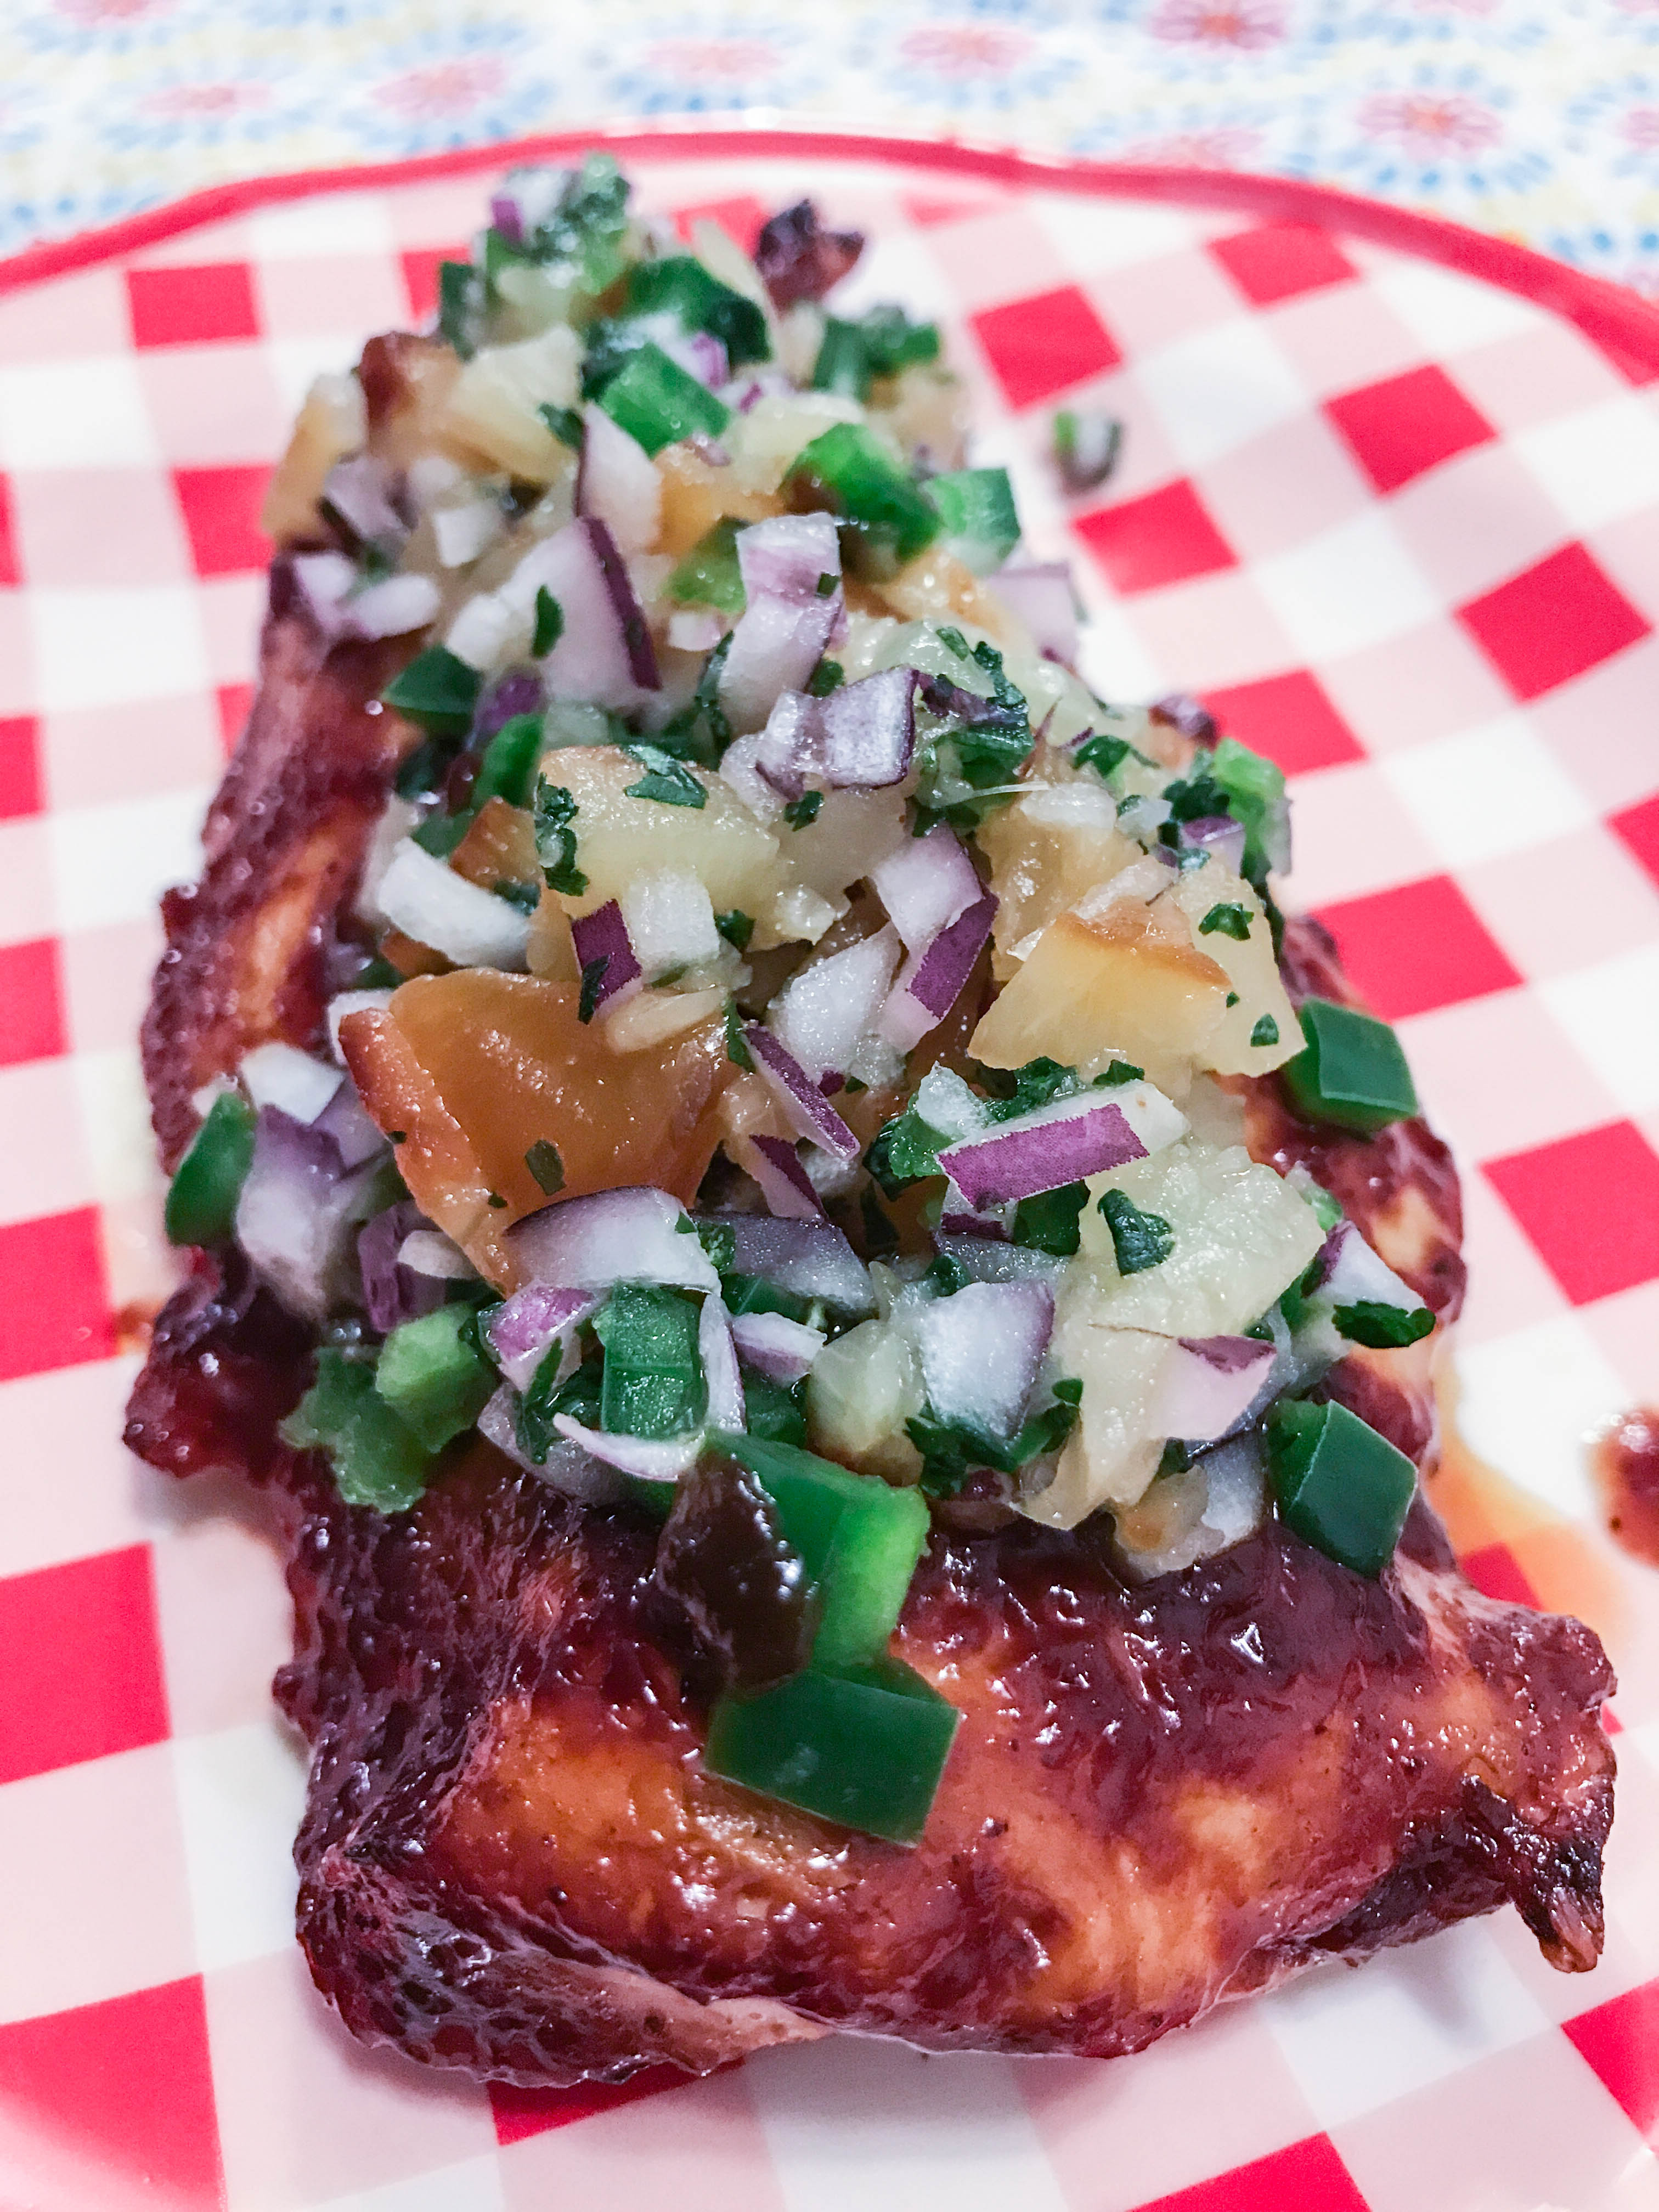 Top the honey jalapeno chicken breast with a big scoop of pineapple salsa